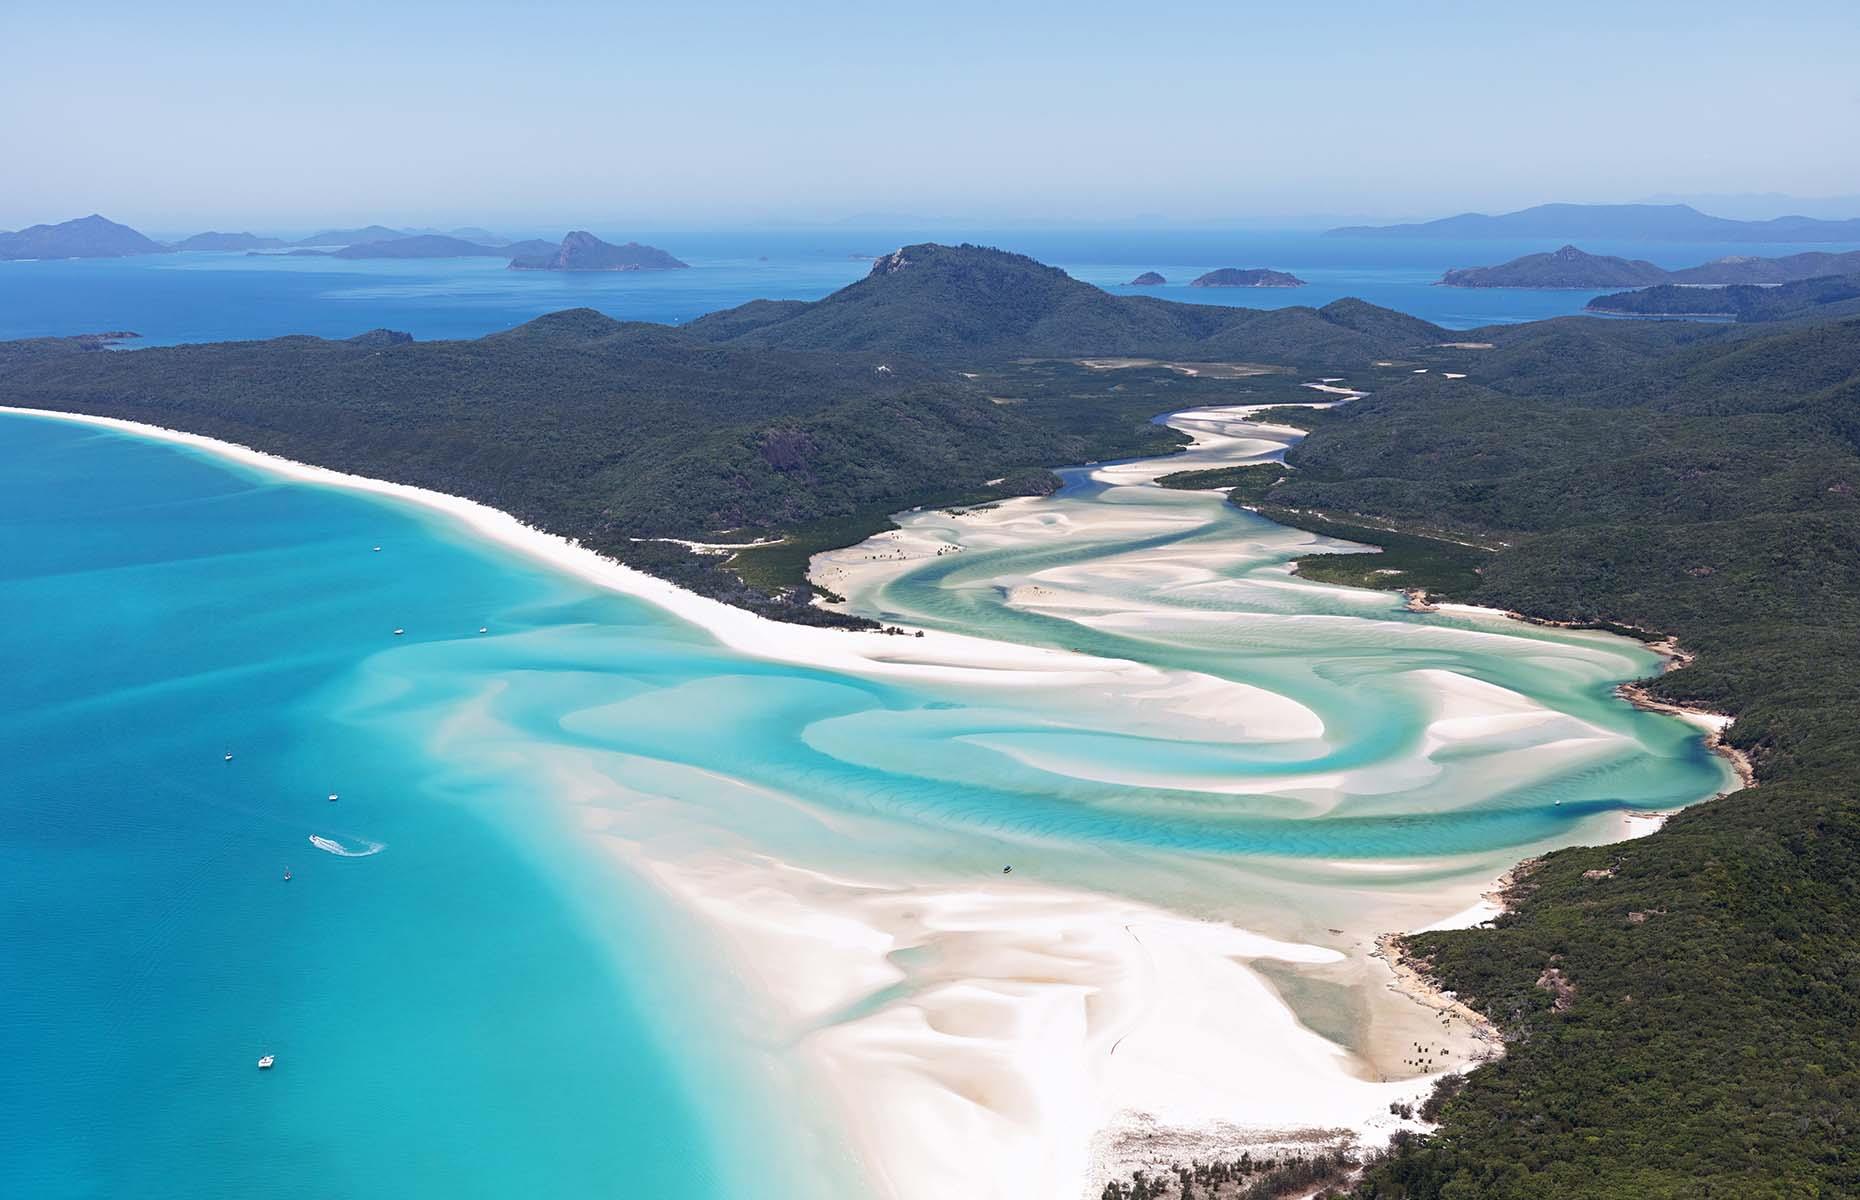 <p>A mesmerizing swirl of bright white silica sand and striking azure waters located in the heart of the Great Barrier Reef, the Whitsundays certainly look like paradise on Earth. It’s not hard to see why the 4.3-mile long (7km) Whitehaven Beach, captured from above in this stunning shot, has been showered with awards and typically attracts visitors from all over the world.</p>  <p><a href="https://www.loveexploring.com/galleries/96347/the-worlds-empty-and-beautiful-beaches-from-above"><strong>Take a look at the world's most beautiful beaches from above</strong></a></p>